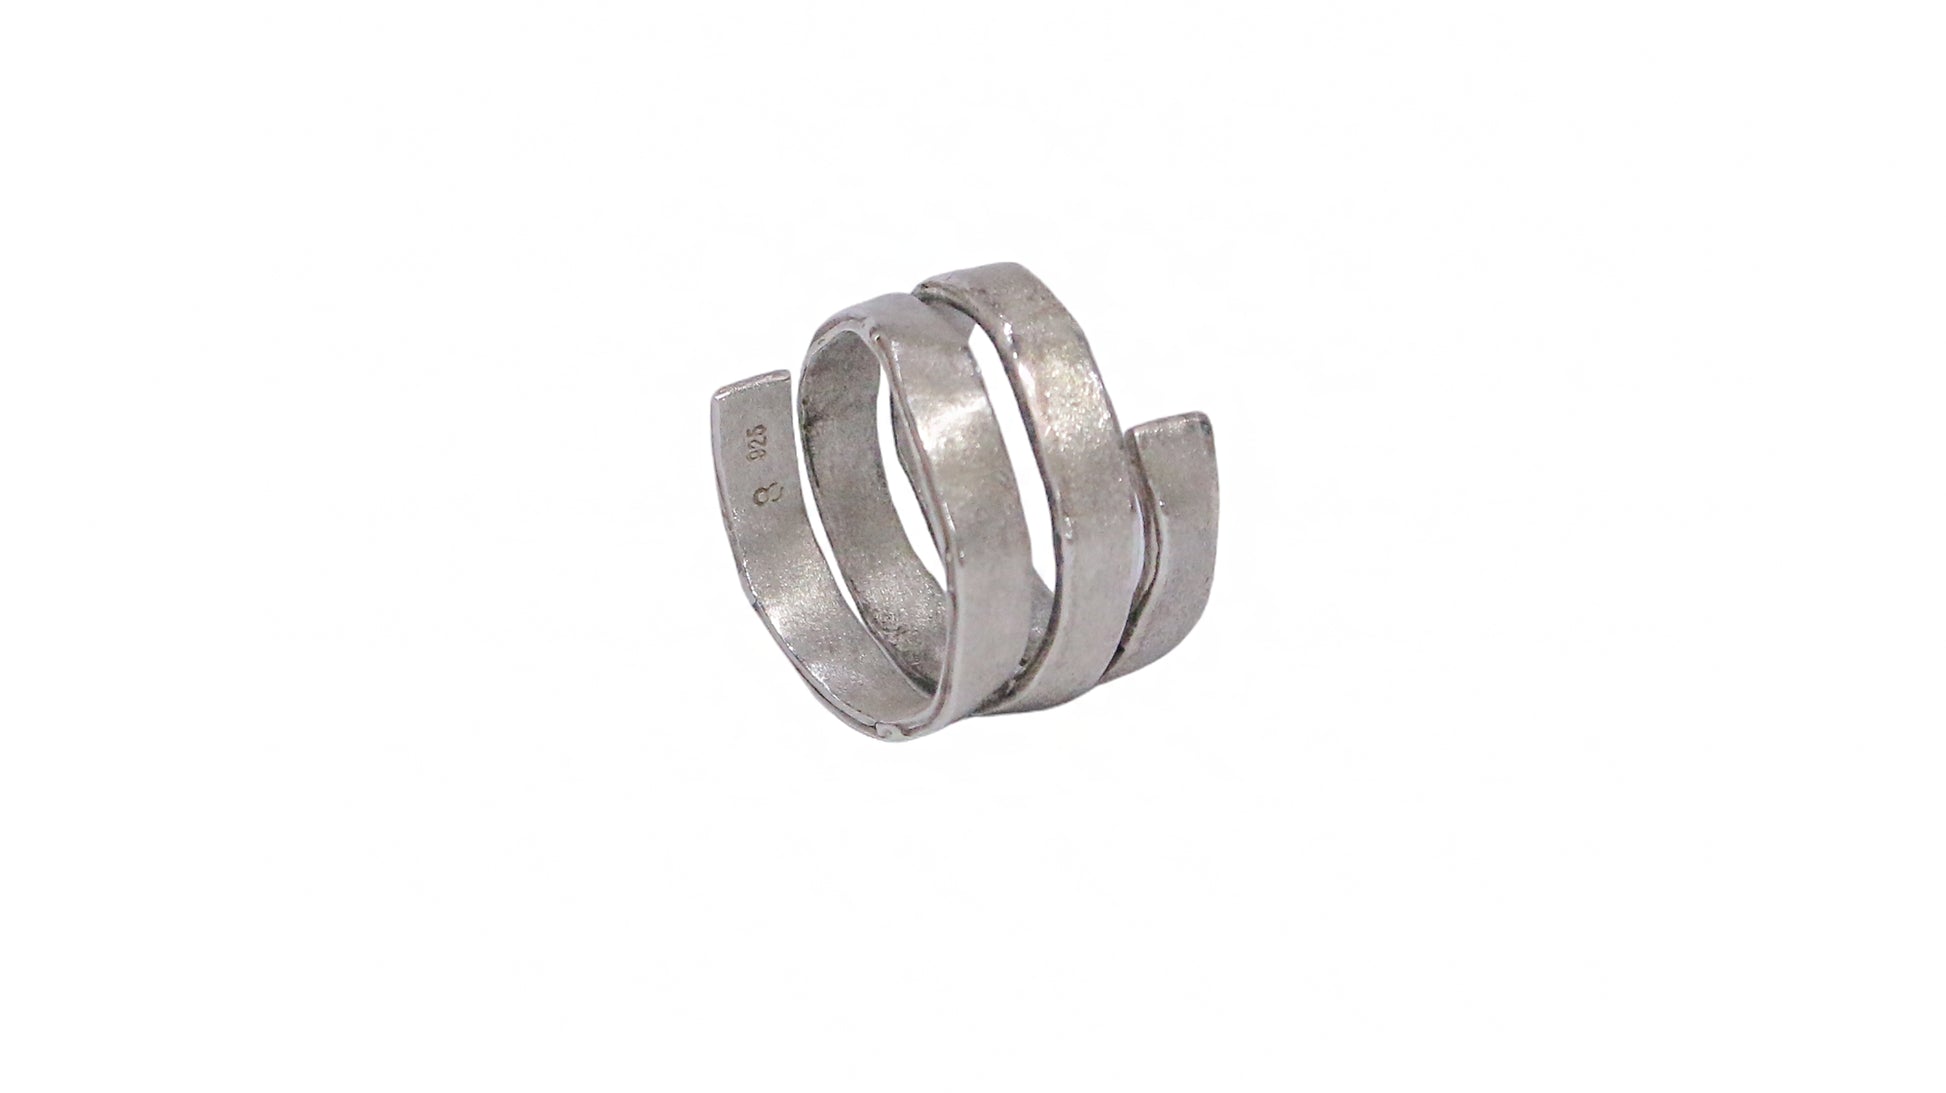 SECTION-RPS/0321 RINGS - JUOUL 